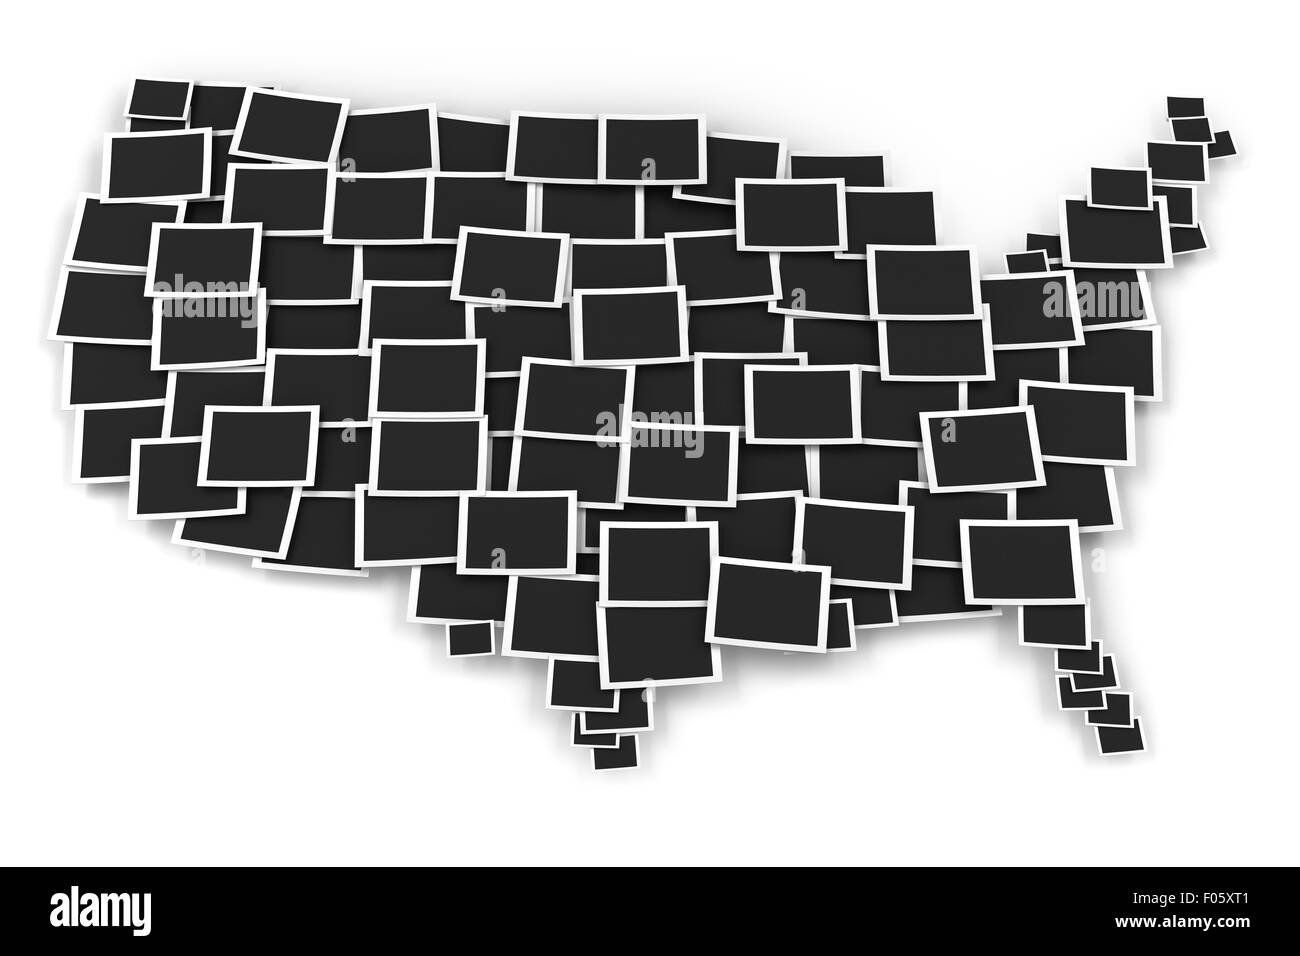 Map of USA formed by blank picture frames Stock Photo